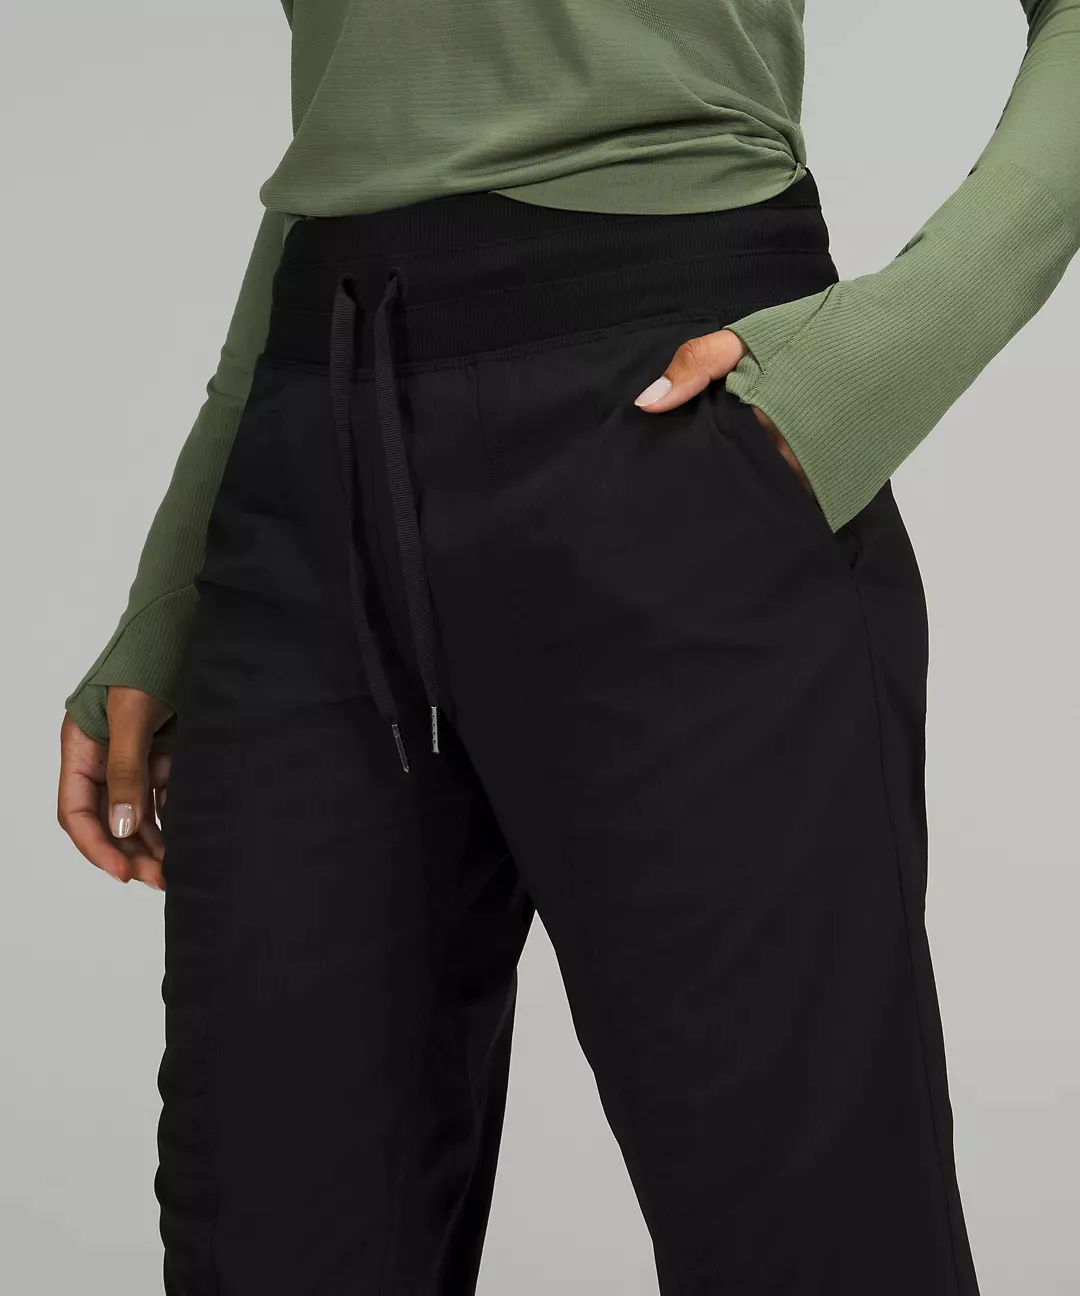 Quick Dry Drawstring Jogger Pants For Women Ideal For Yoga, Dance, Running,  Gym, And Fitness Loose Fit Sports Tesco Cropped Trousers Womens For Girls  CK10745046961 From Fg4r, $22.69